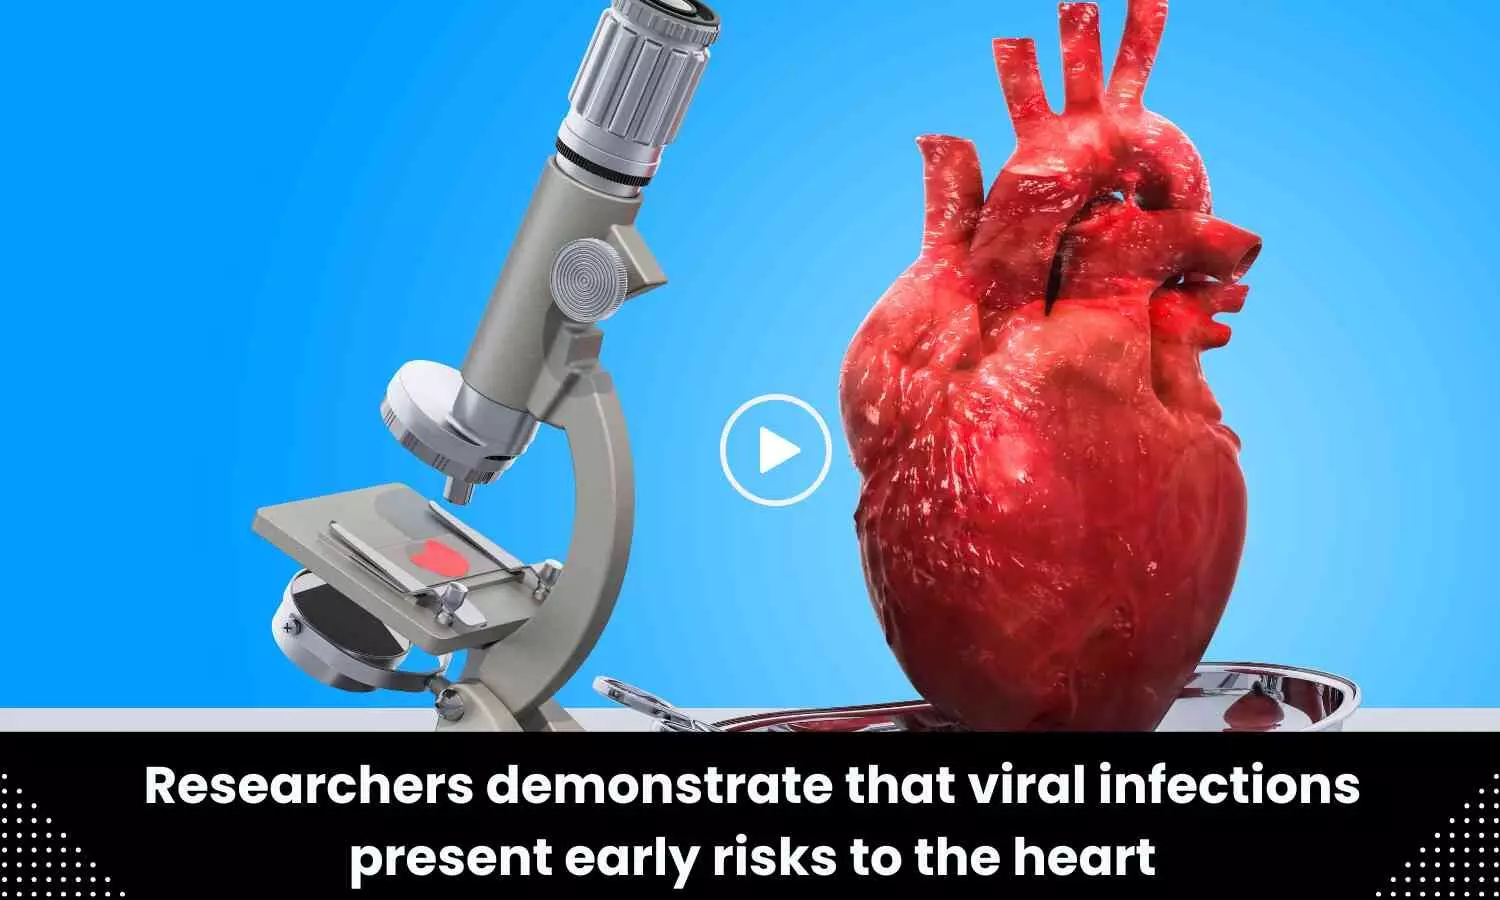 Researchers demonstrate that viral infections present early risks to the heart